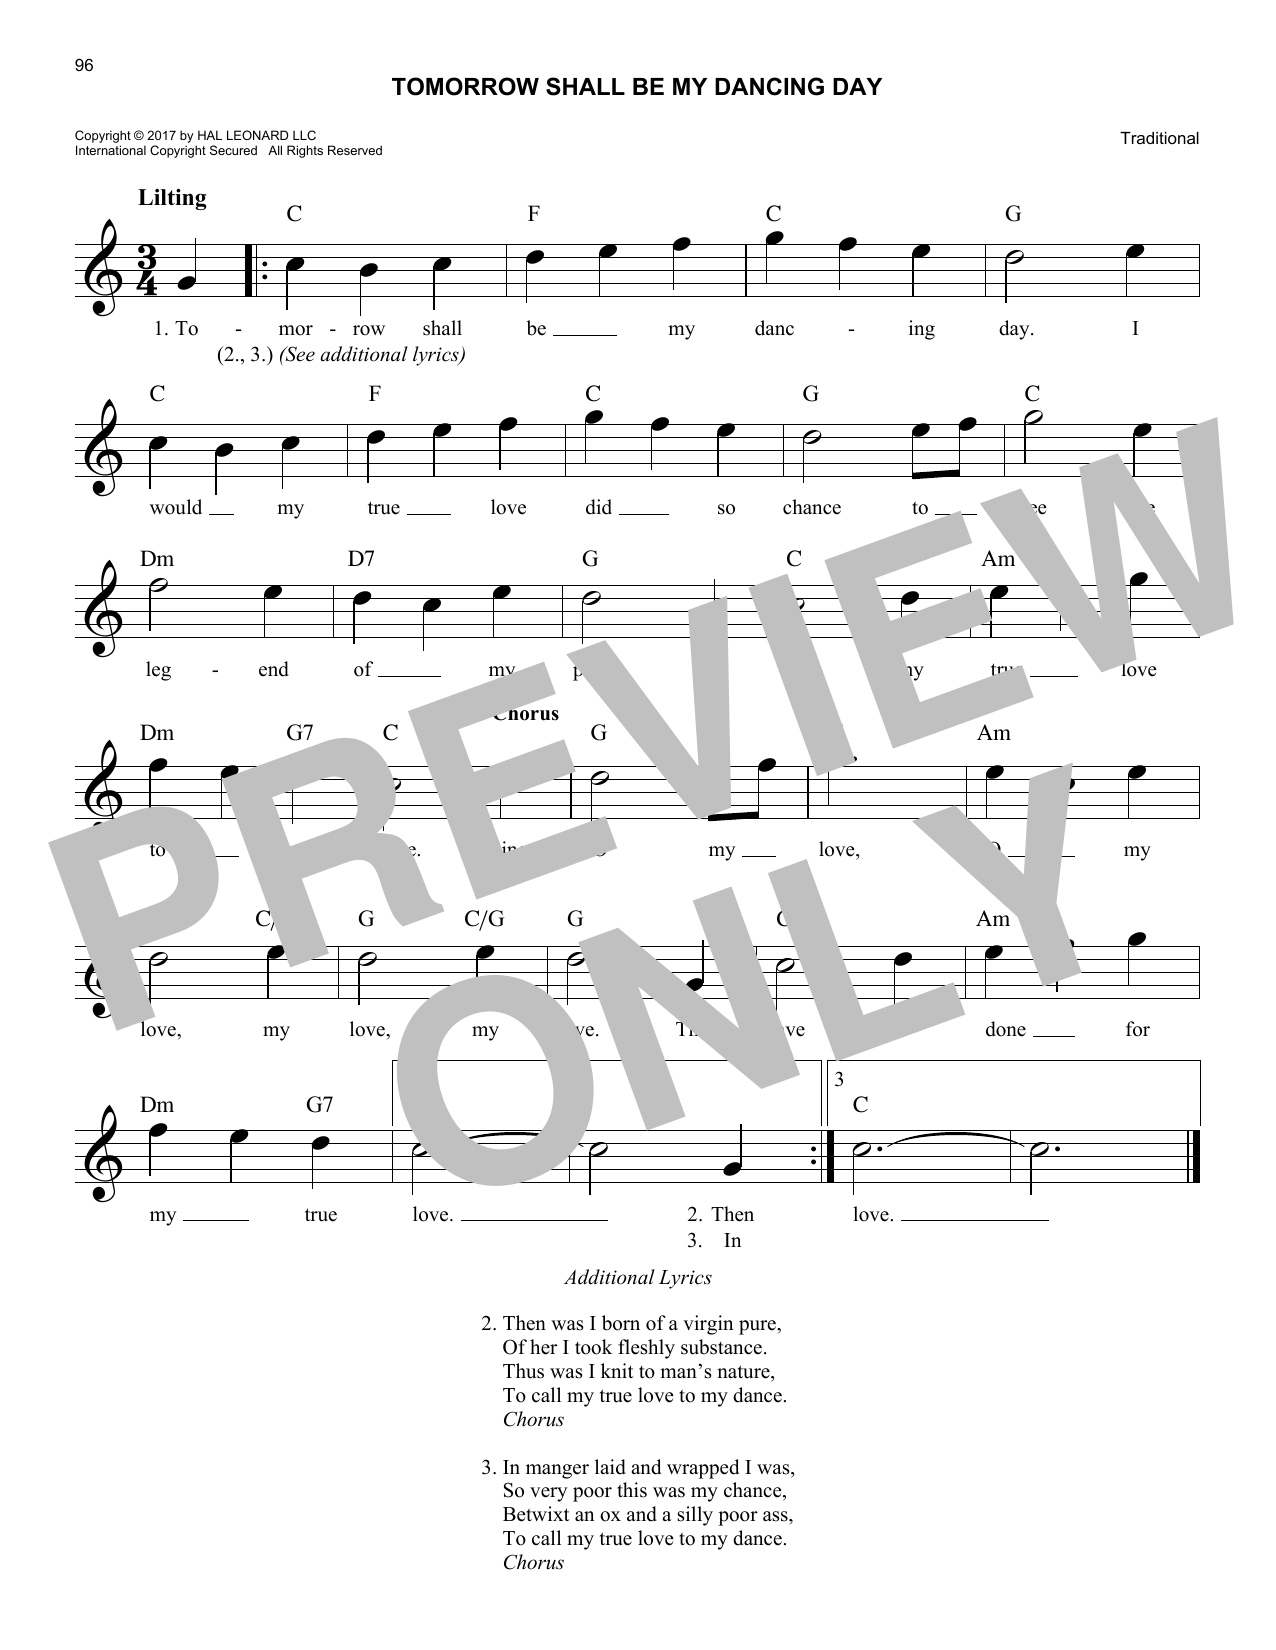 Download Traditional Tomorrow Shall Be My Dancing Day Sheet Music